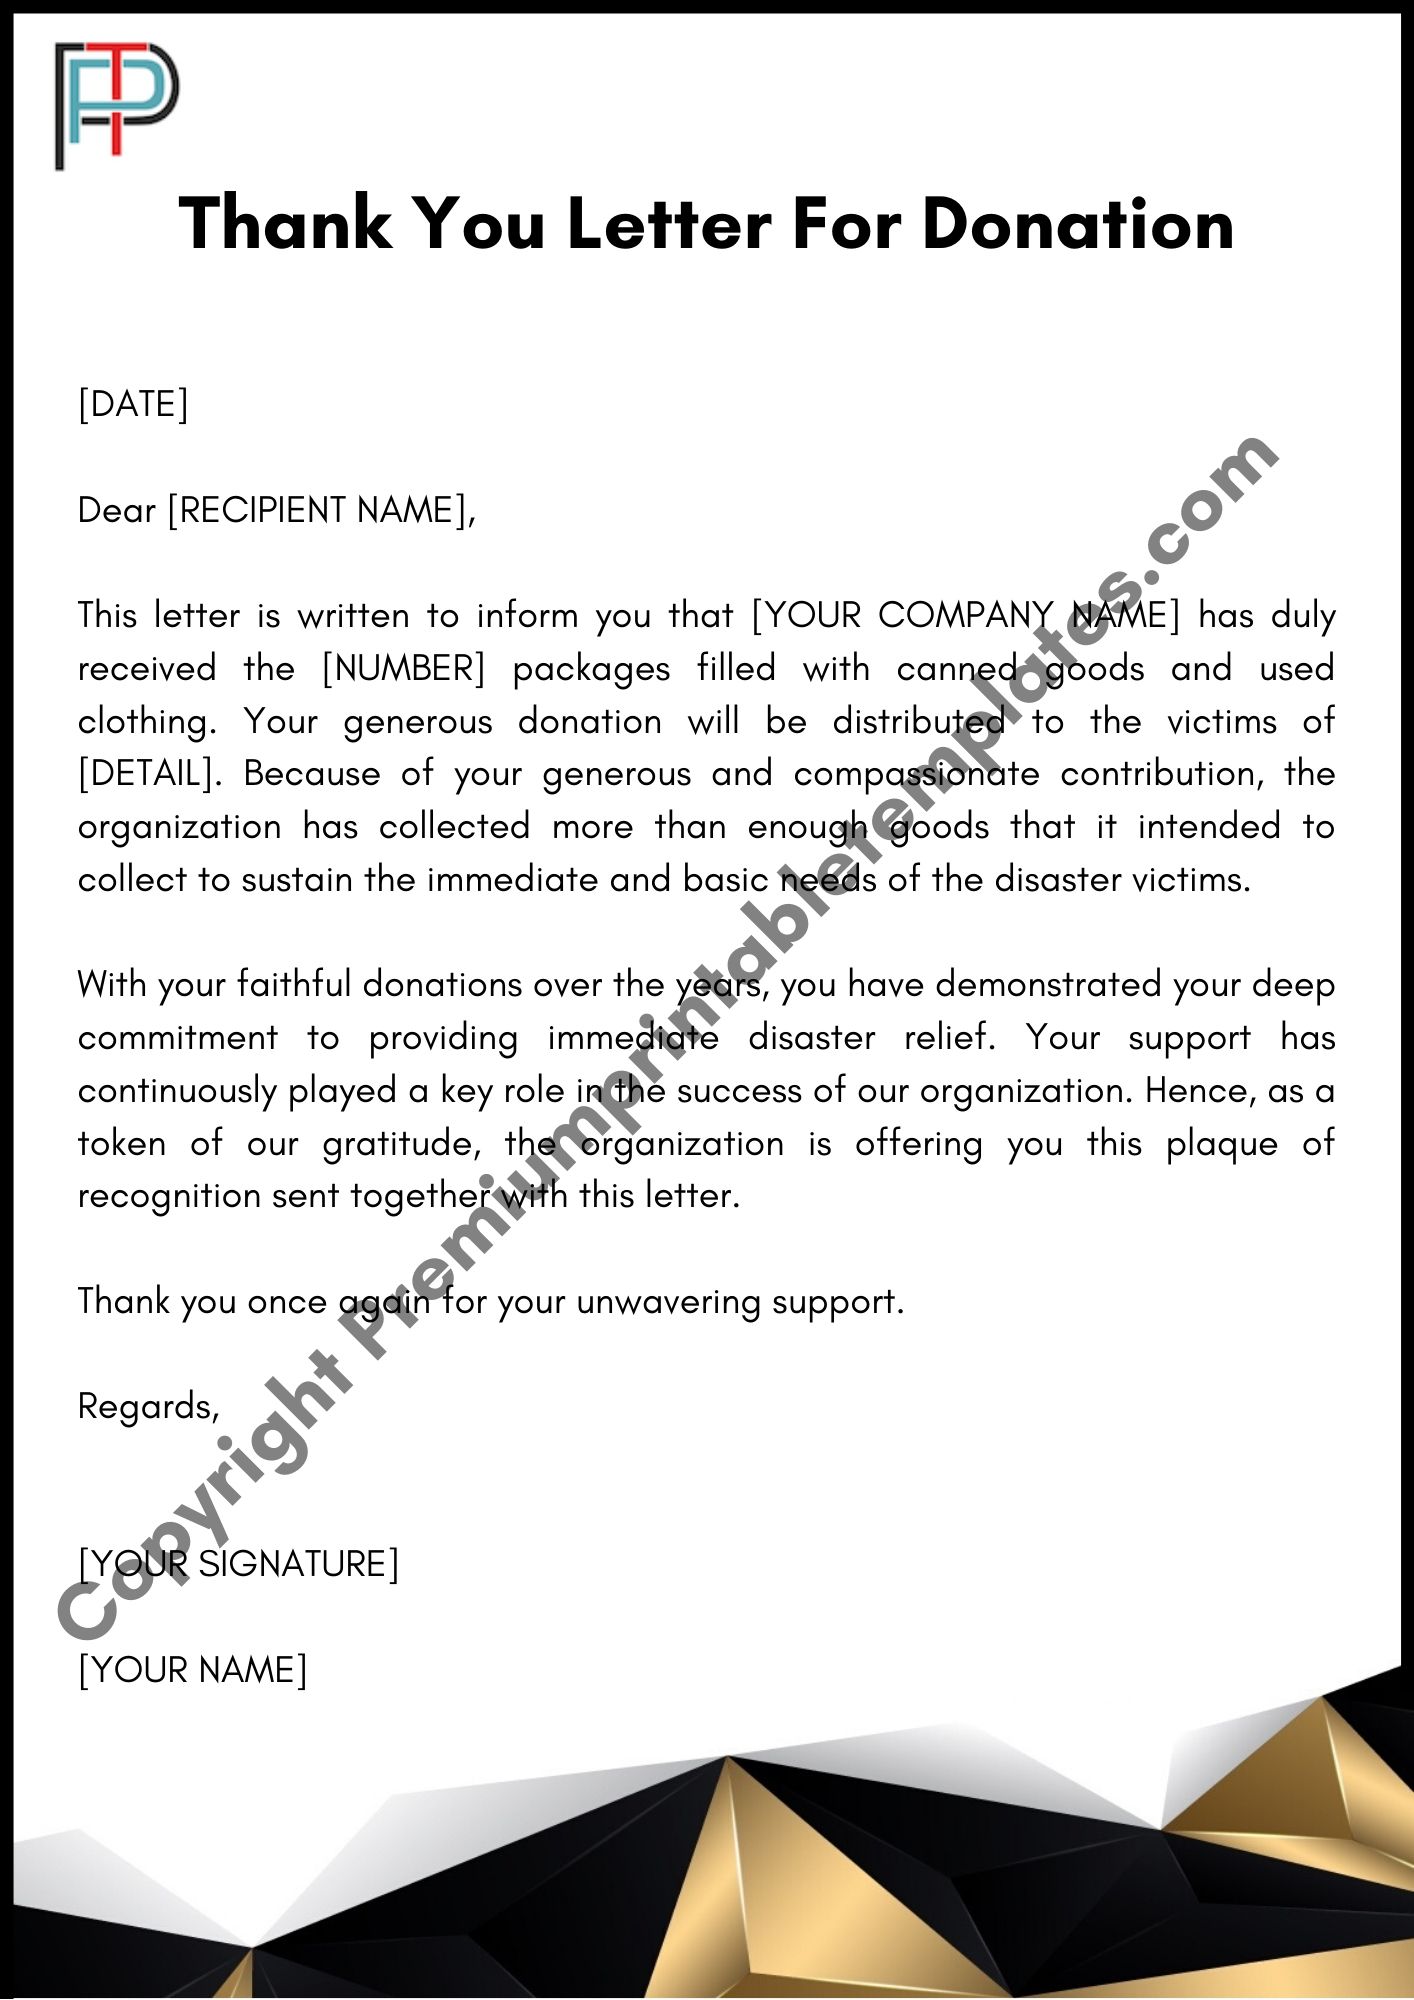 Thank You Letter For Donation Editable Pdf